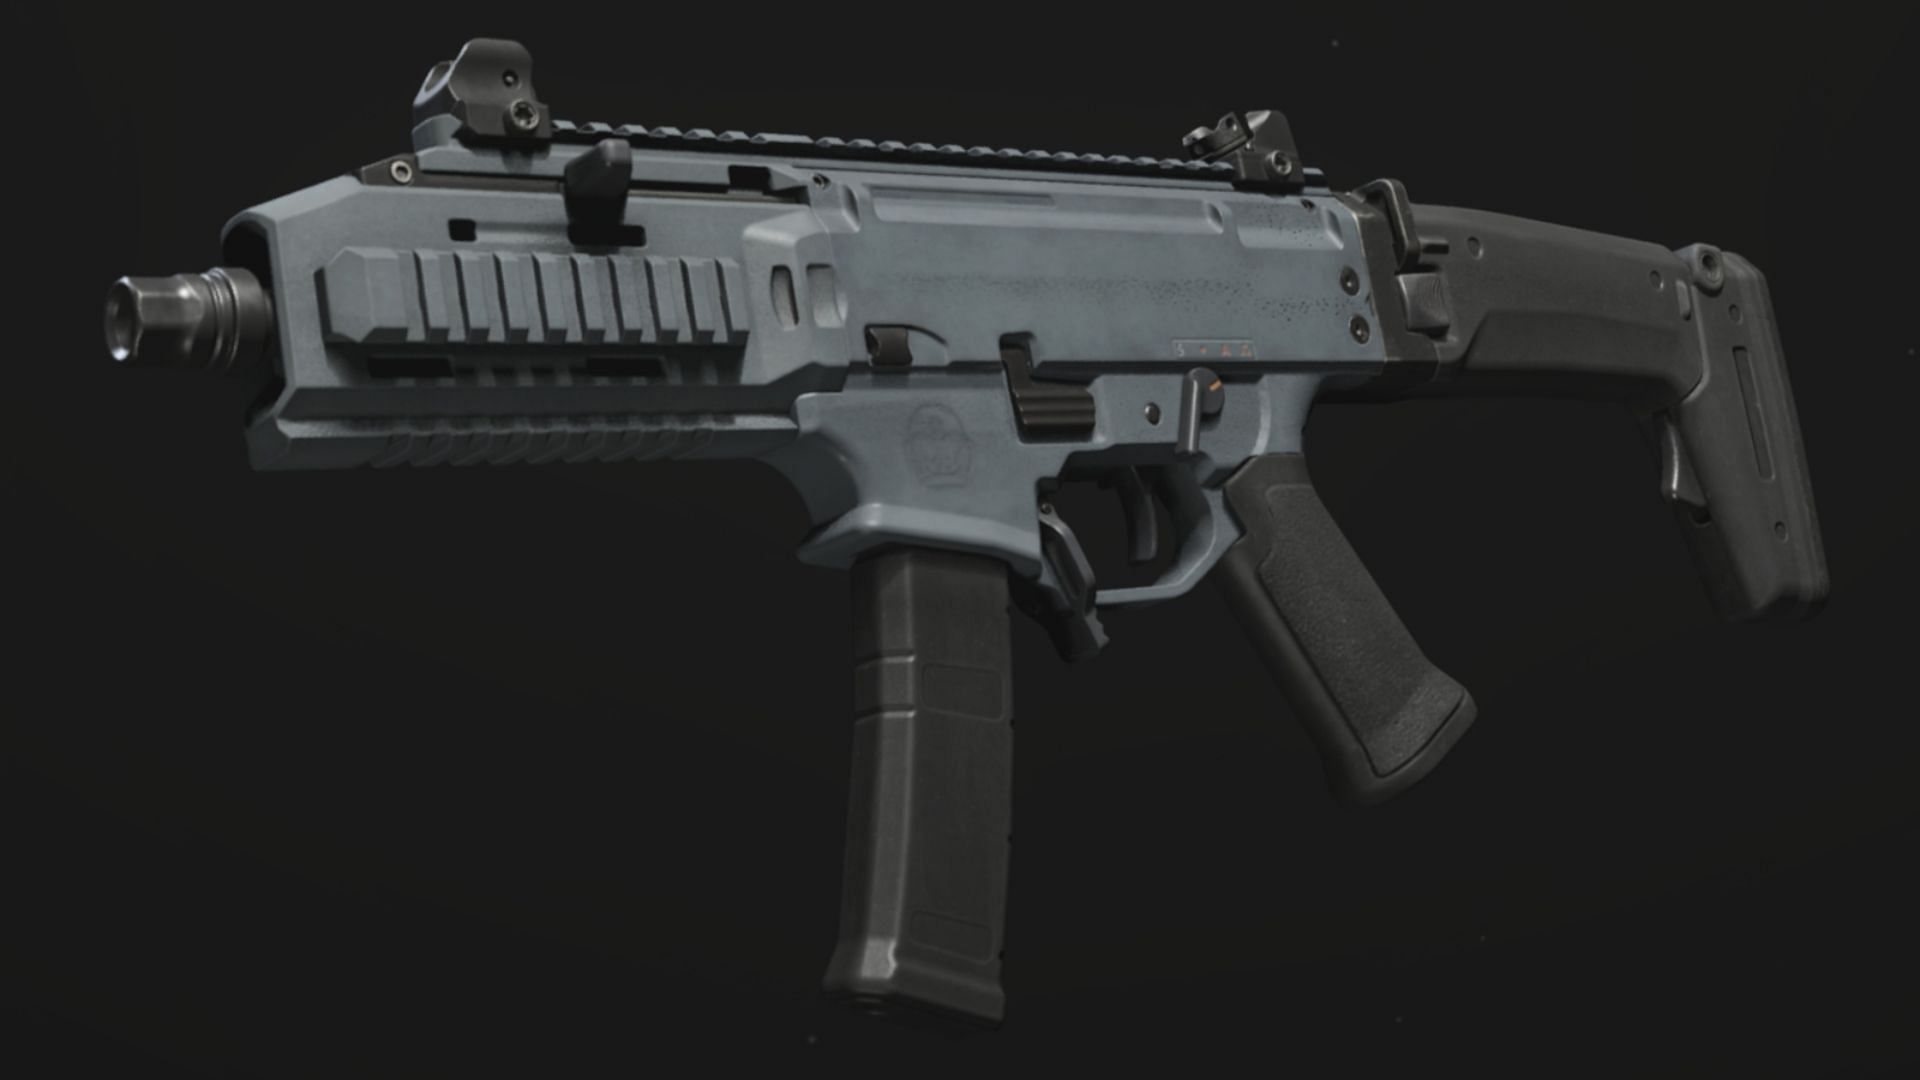 RIVAL-9 loadout in MW3 (Image via Activision)